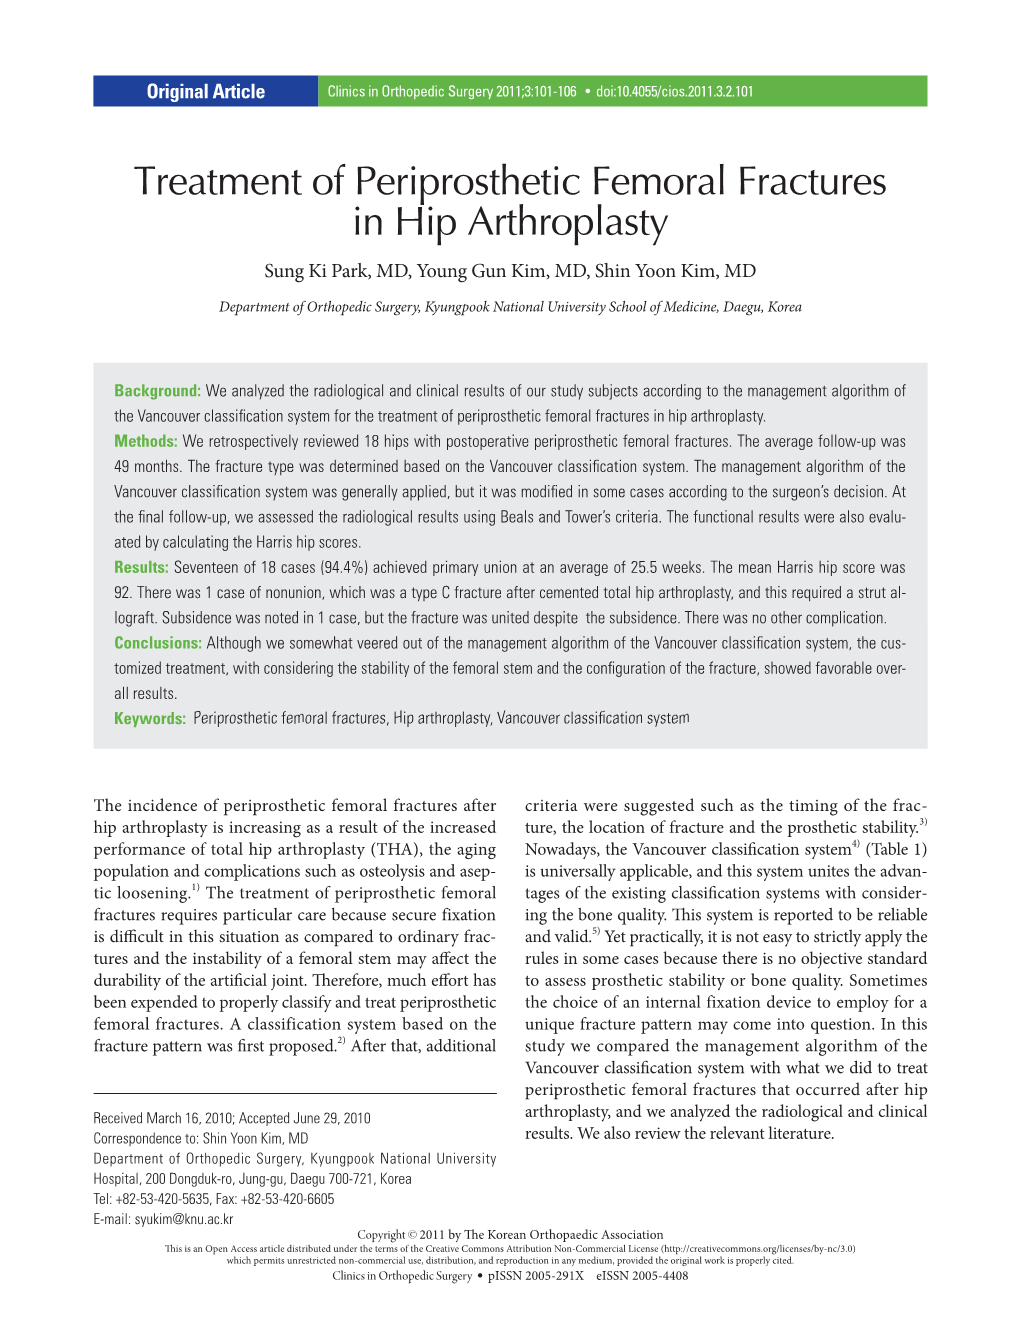 Treatment of Periprosthetic Femoral Fractures in Hip Arthroplasty Sung Ki Park, MD, Young Gun Kim, MD, Shin Yoon Kim, MD